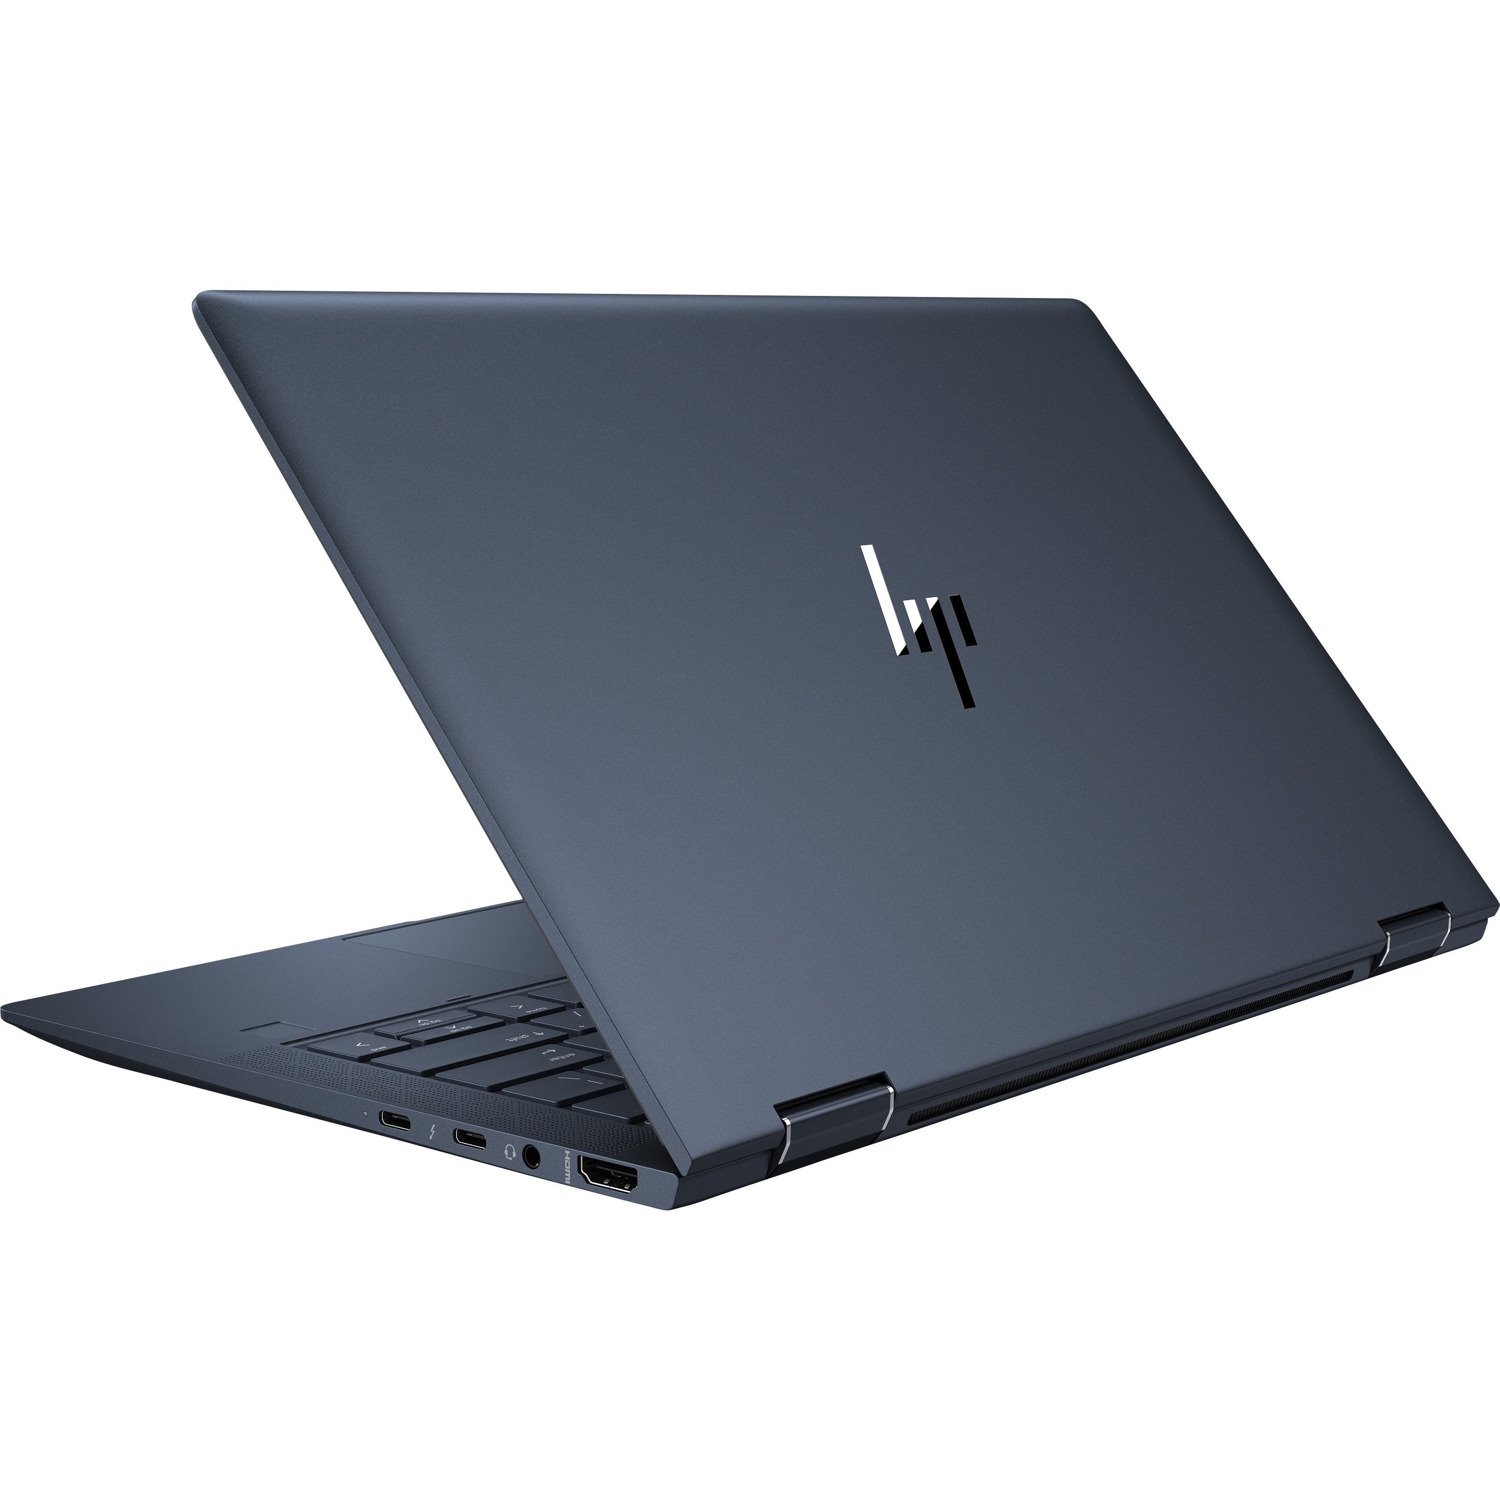 HP Elite Dragonfly G2 LTE Advanced 13.3" Touchscreen Convertible 2 in 1 Notebook - Full HD - 1920 x 1080 - Intel Core i7 11th Gen i7-1185G7 Quad-core (4 Core) 3 GHz - 16 GB Total RAM - 1 TB SSD